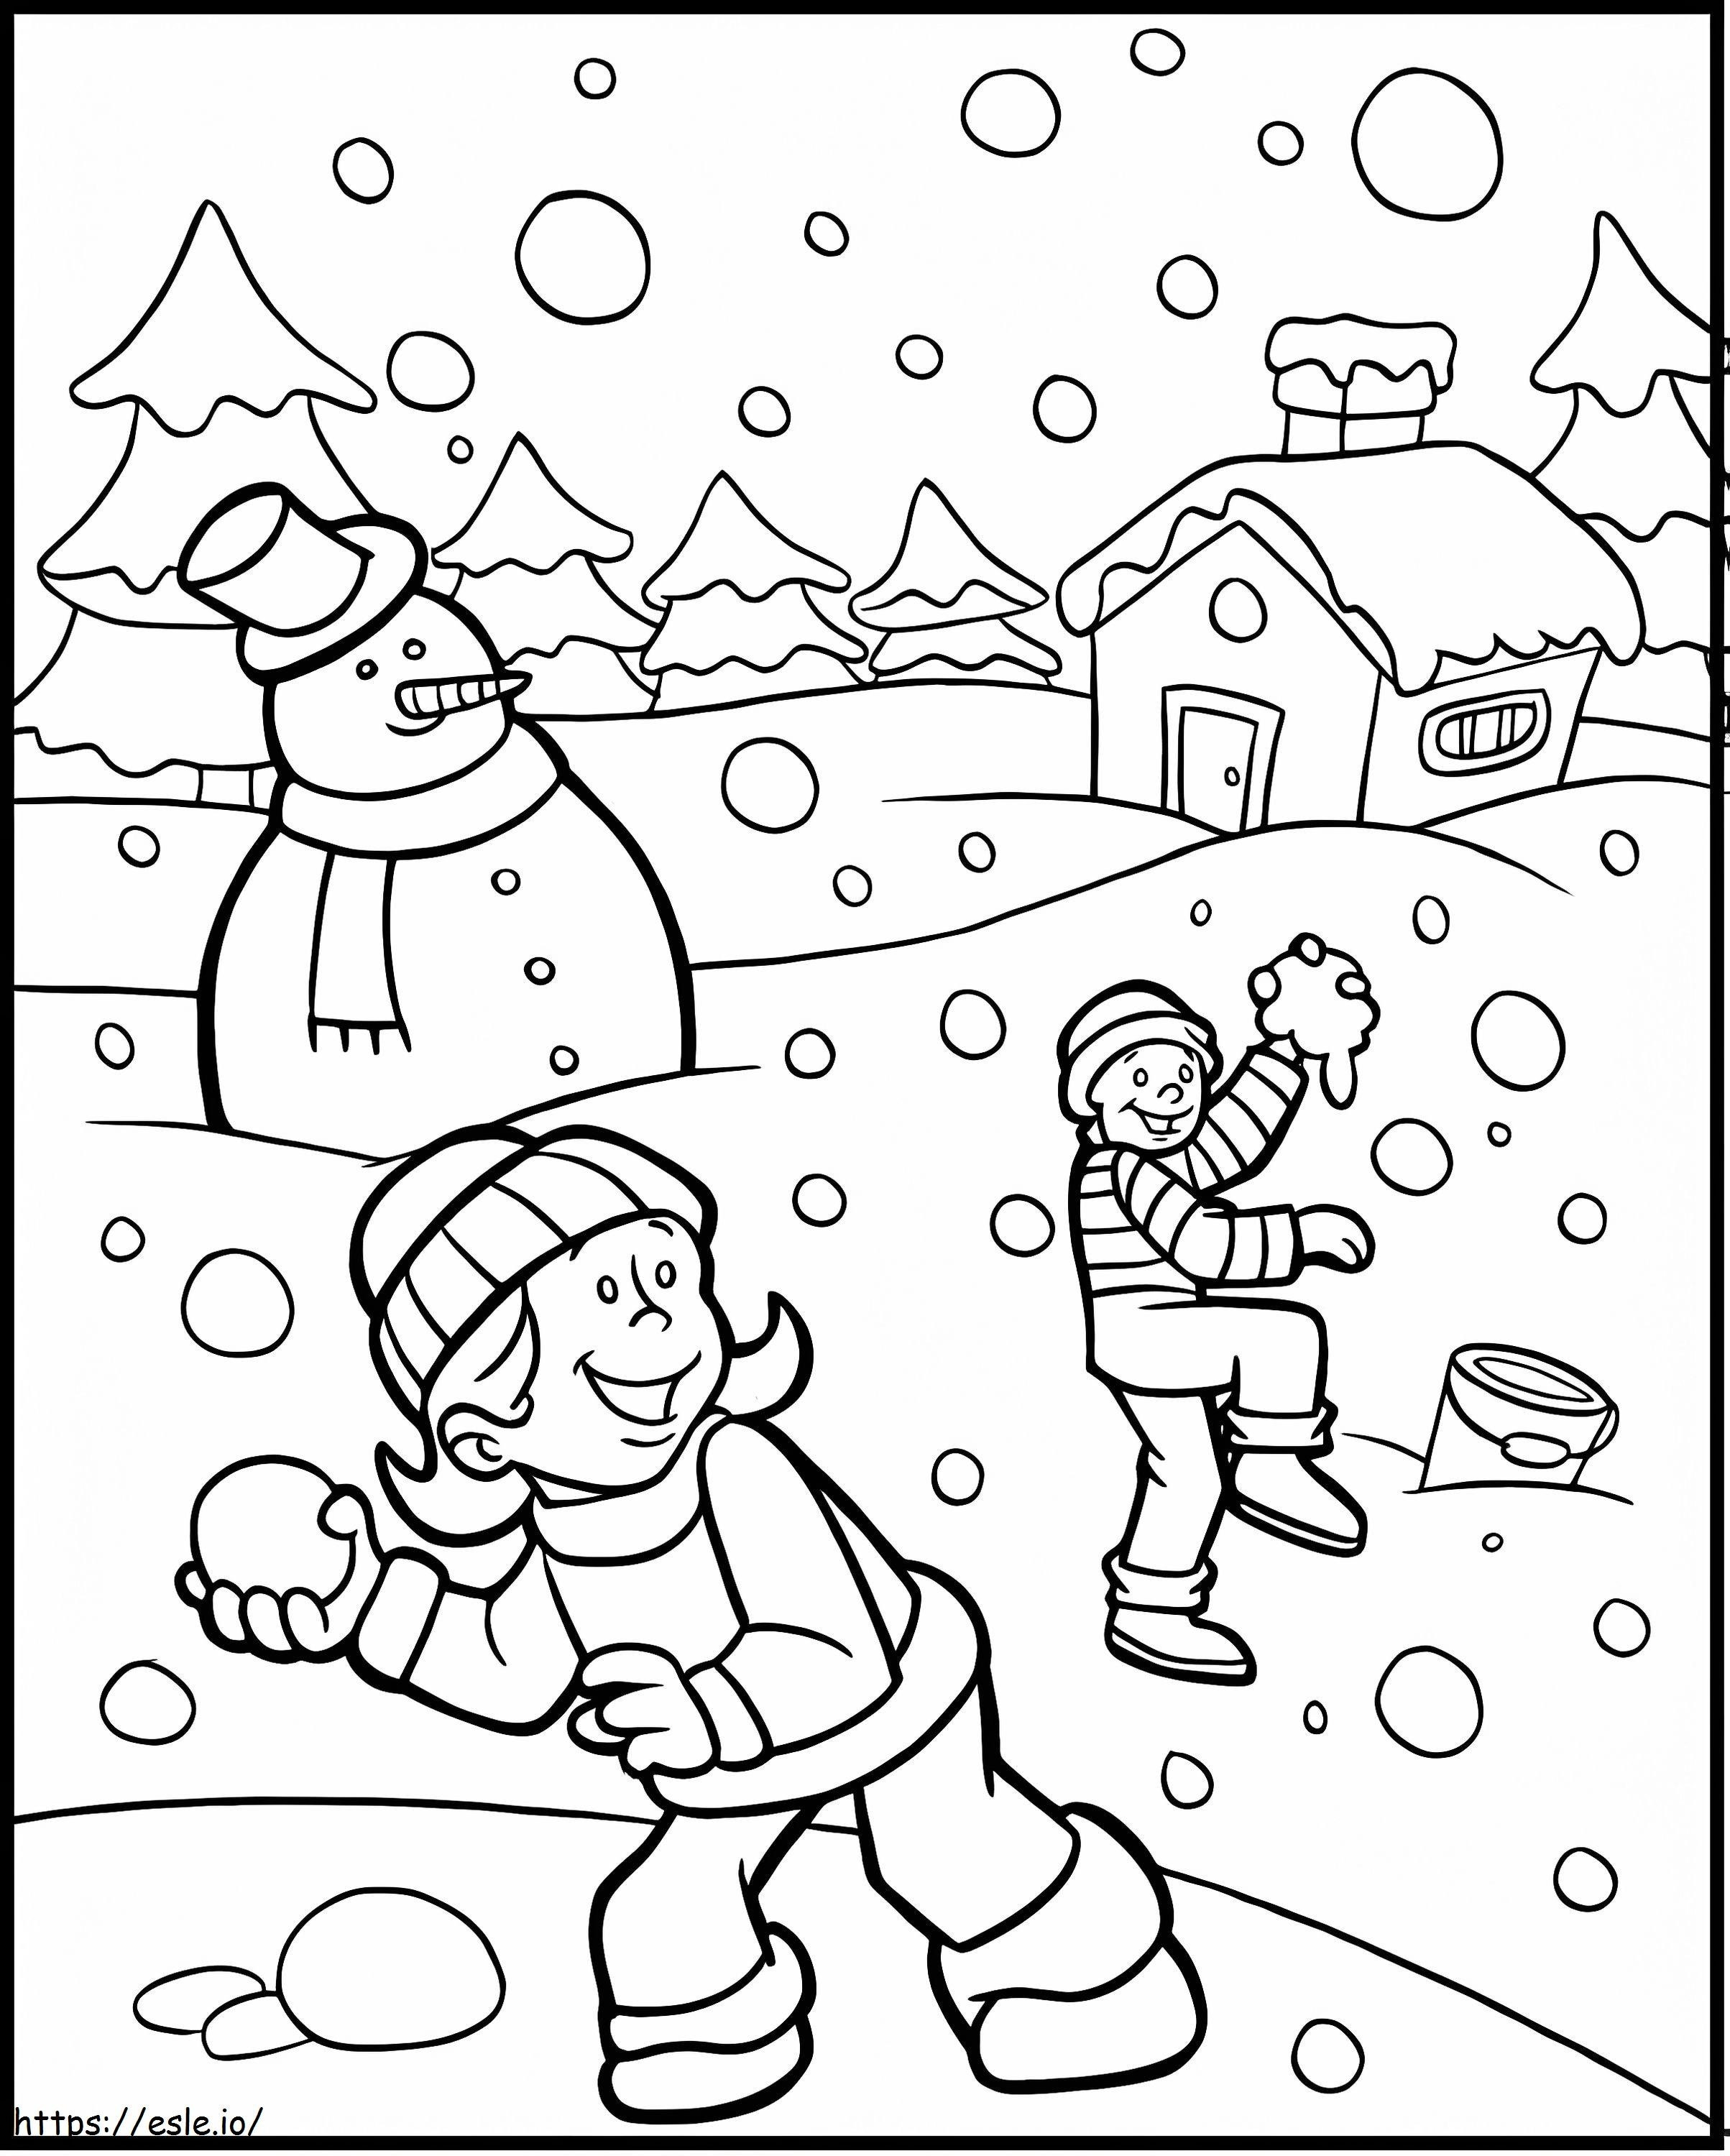 Happy Snowball Fight coloring page